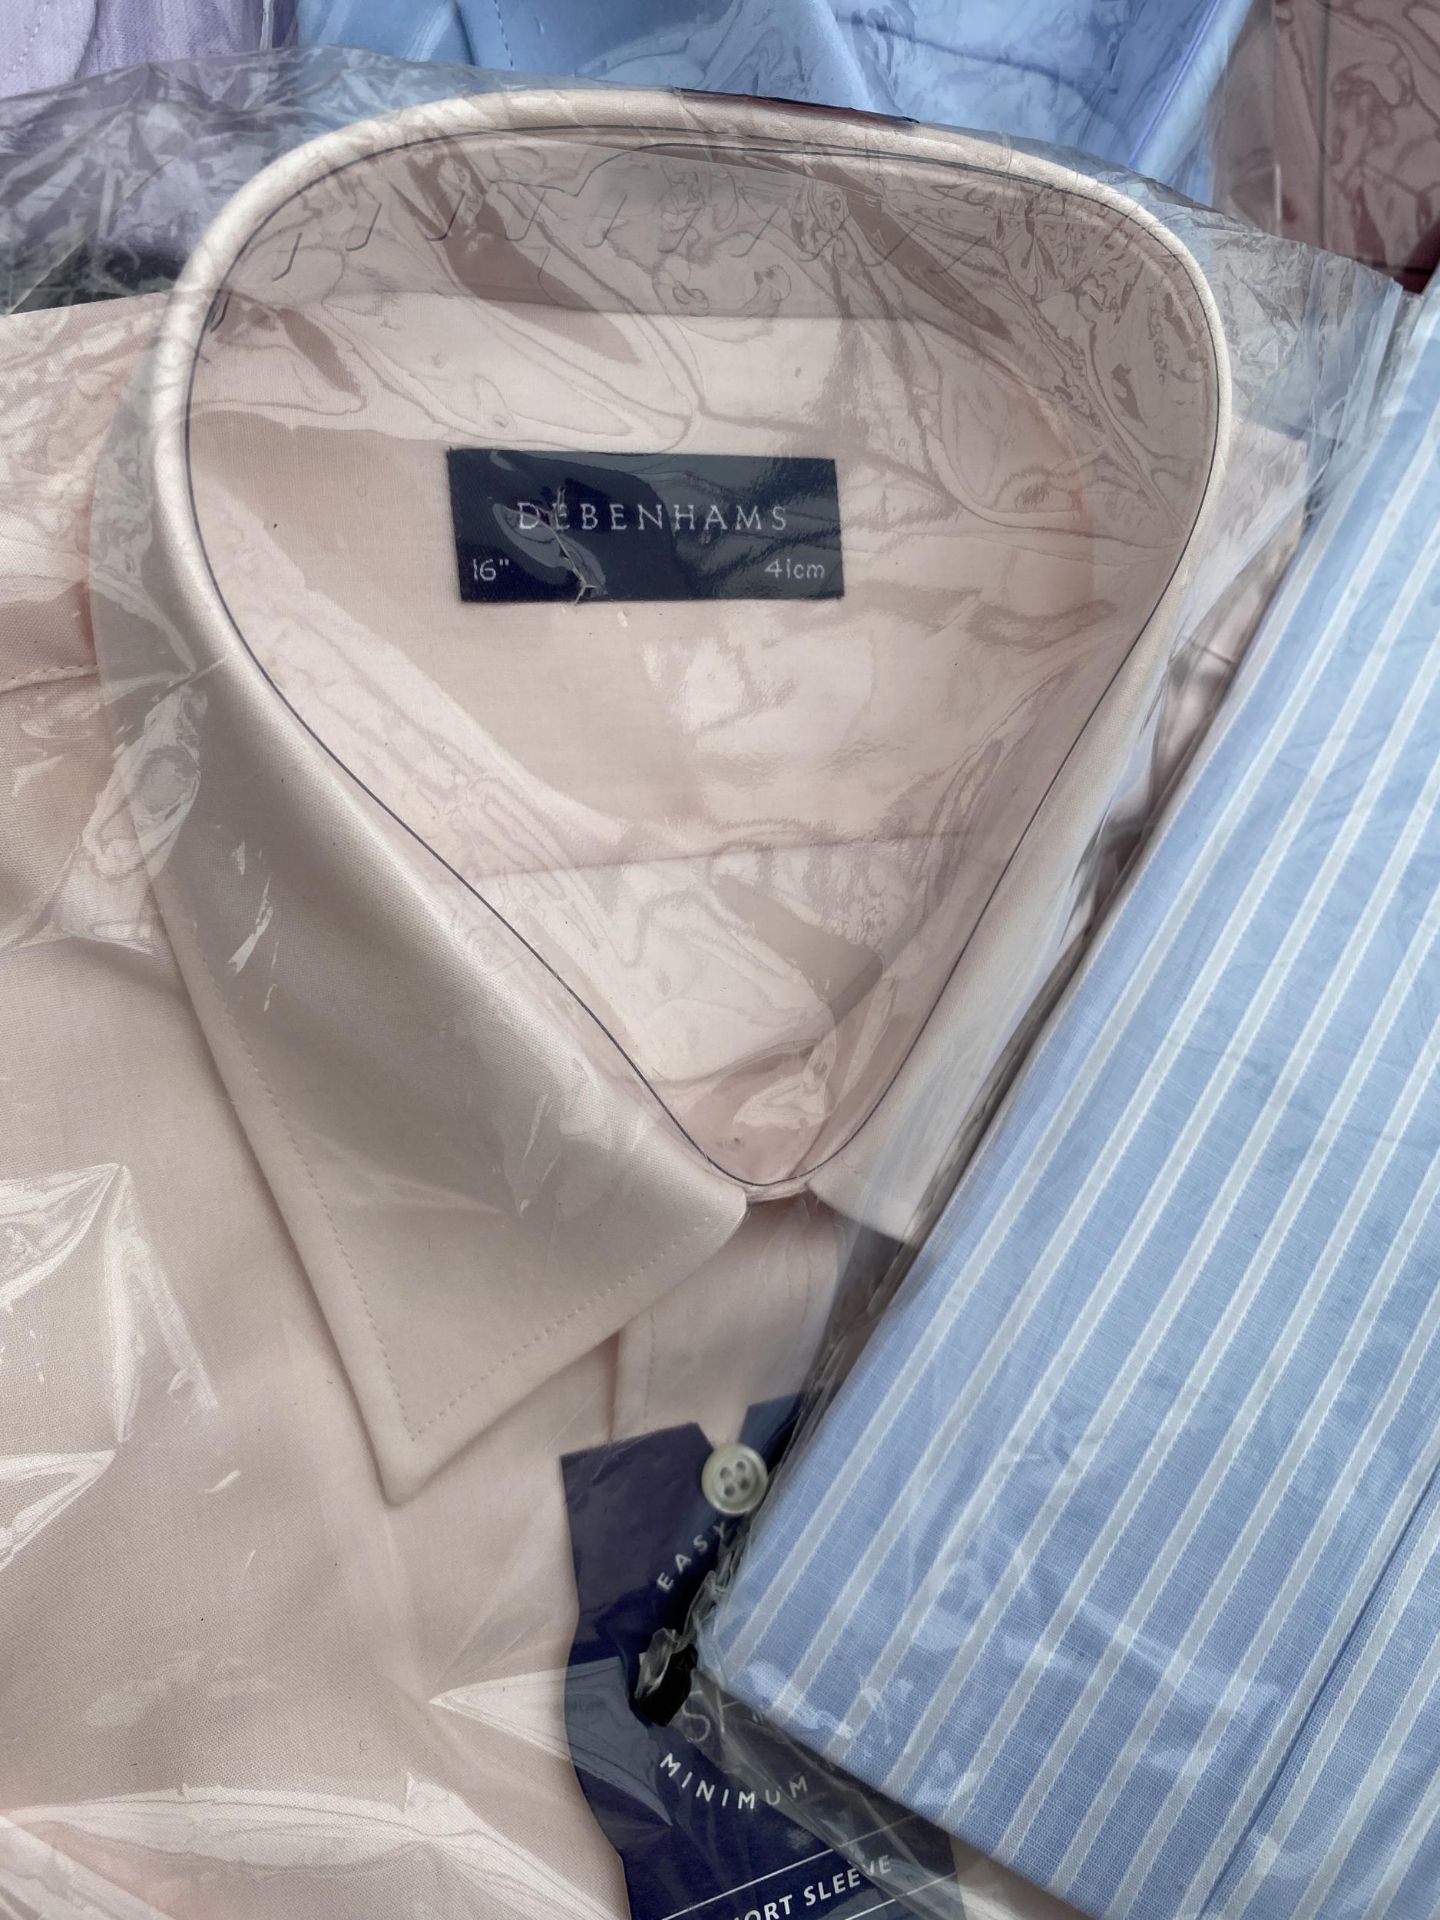 AN ASSORTMENT OF NEW AND PACKAGED MENS SHIRTS - Image 3 of 4